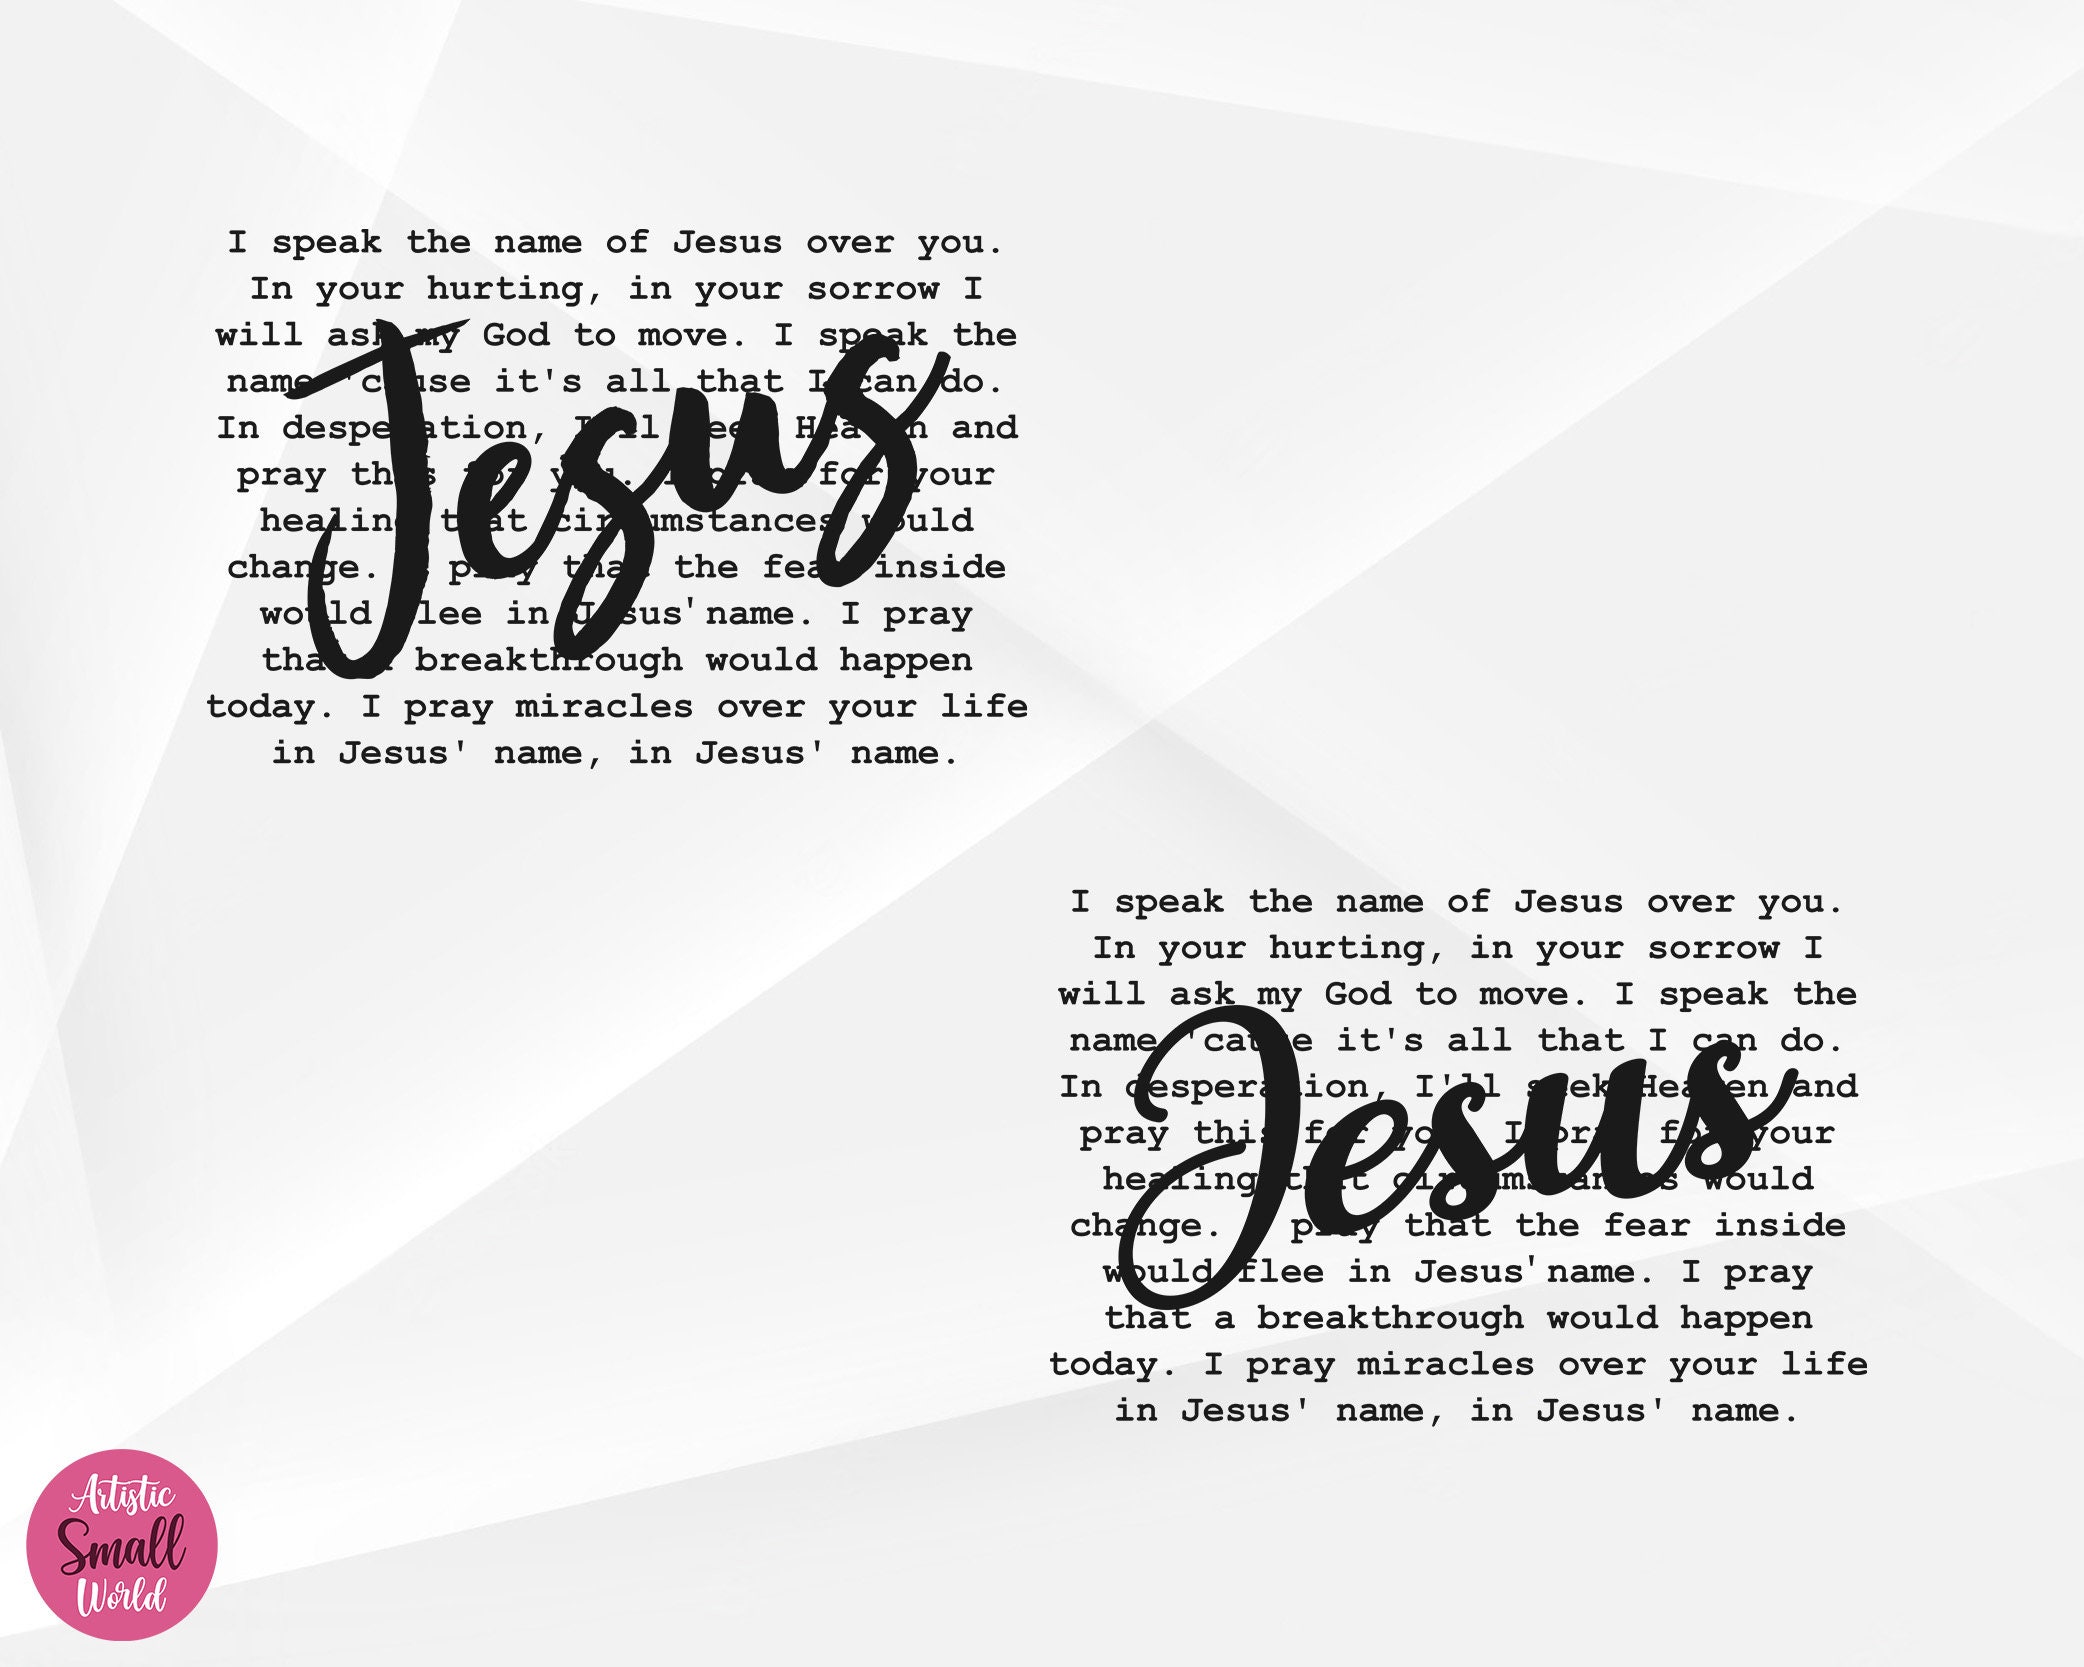 In your world I have another name. That name is Jesus Christ as